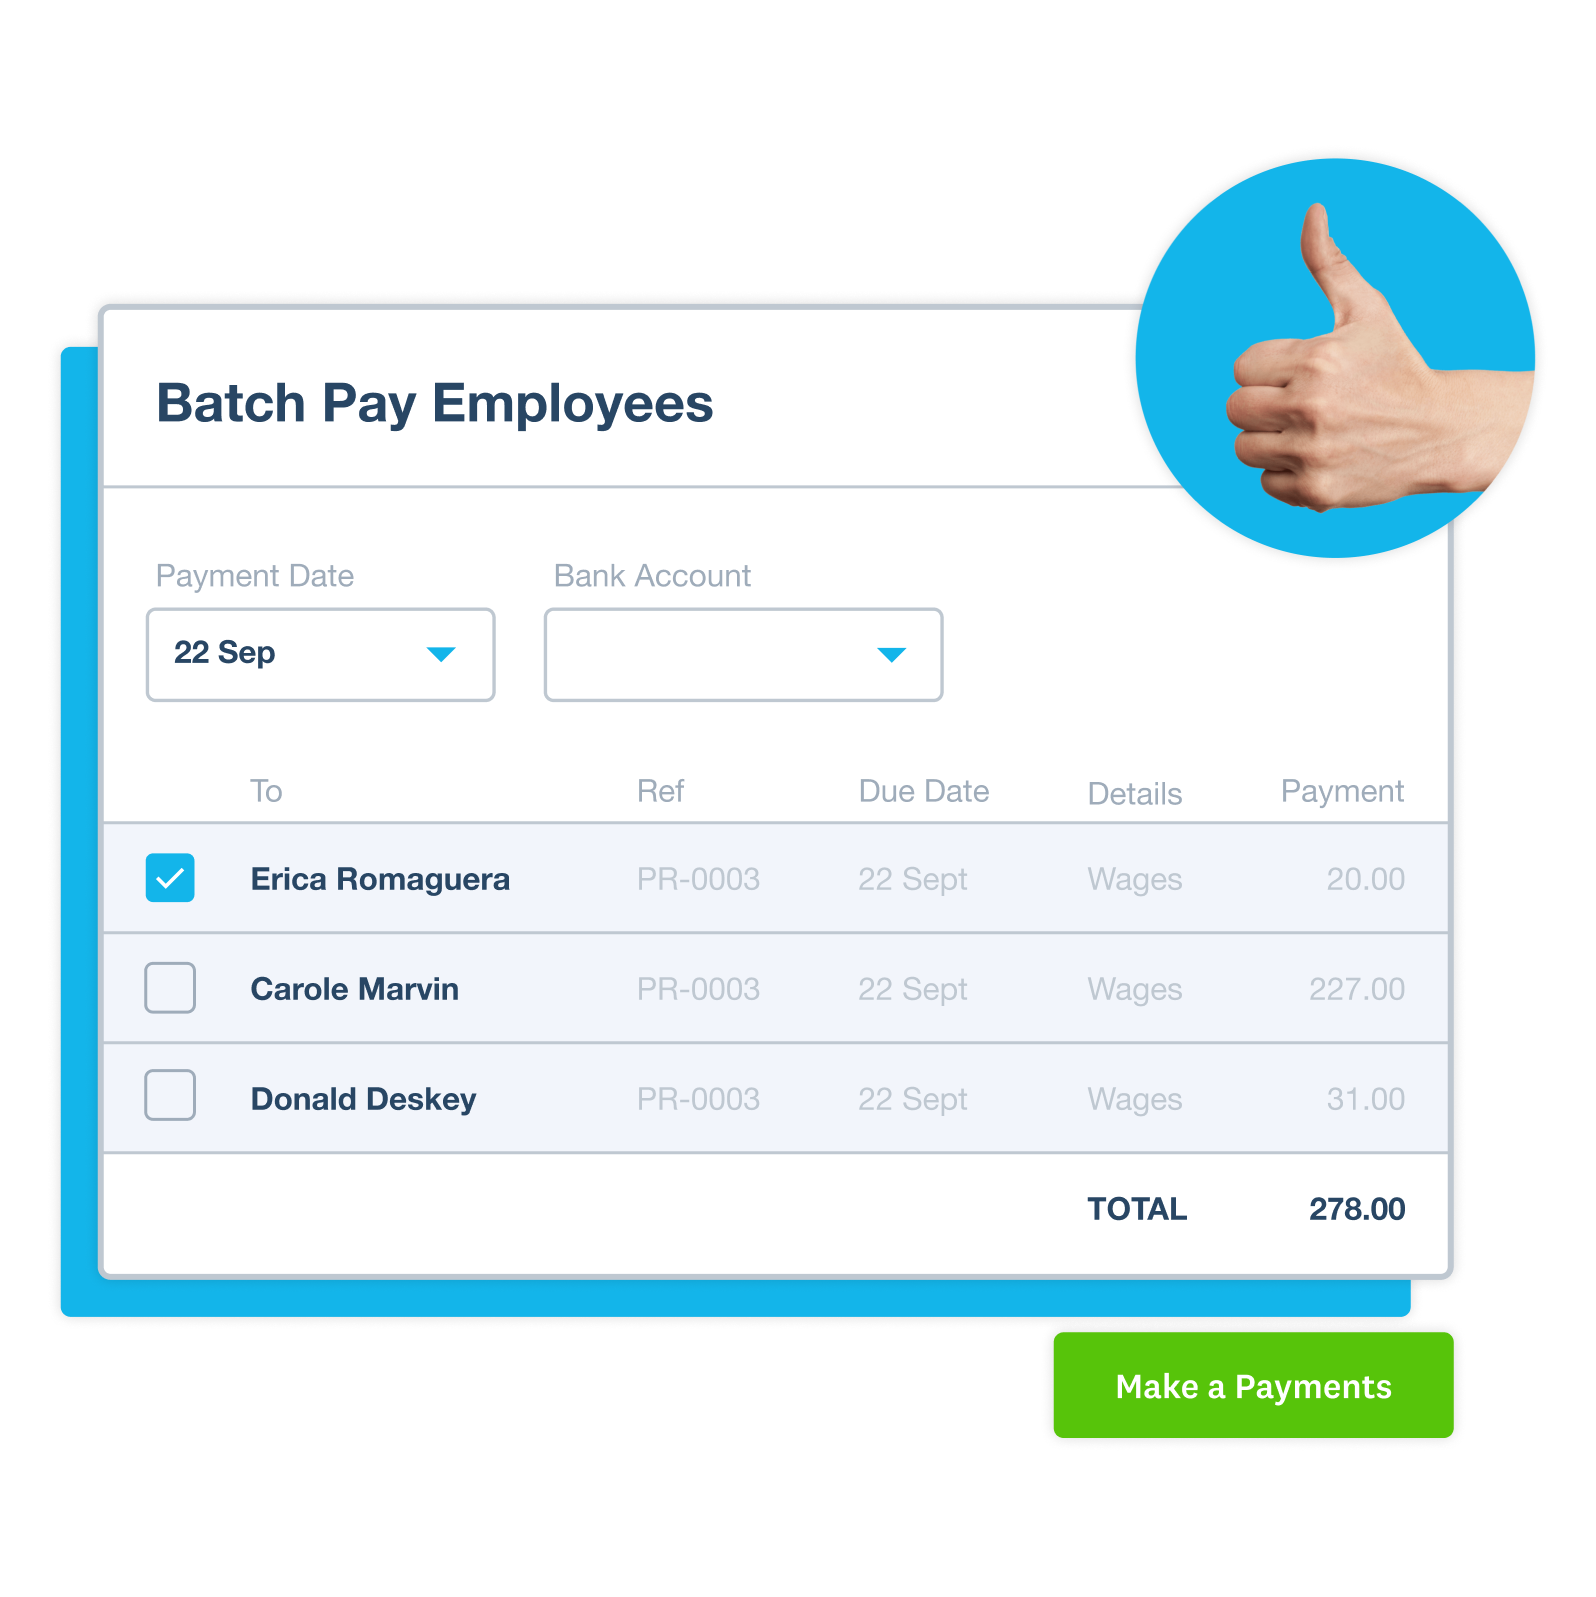 A screen displays date and bank account from which to batch pay selected employees.